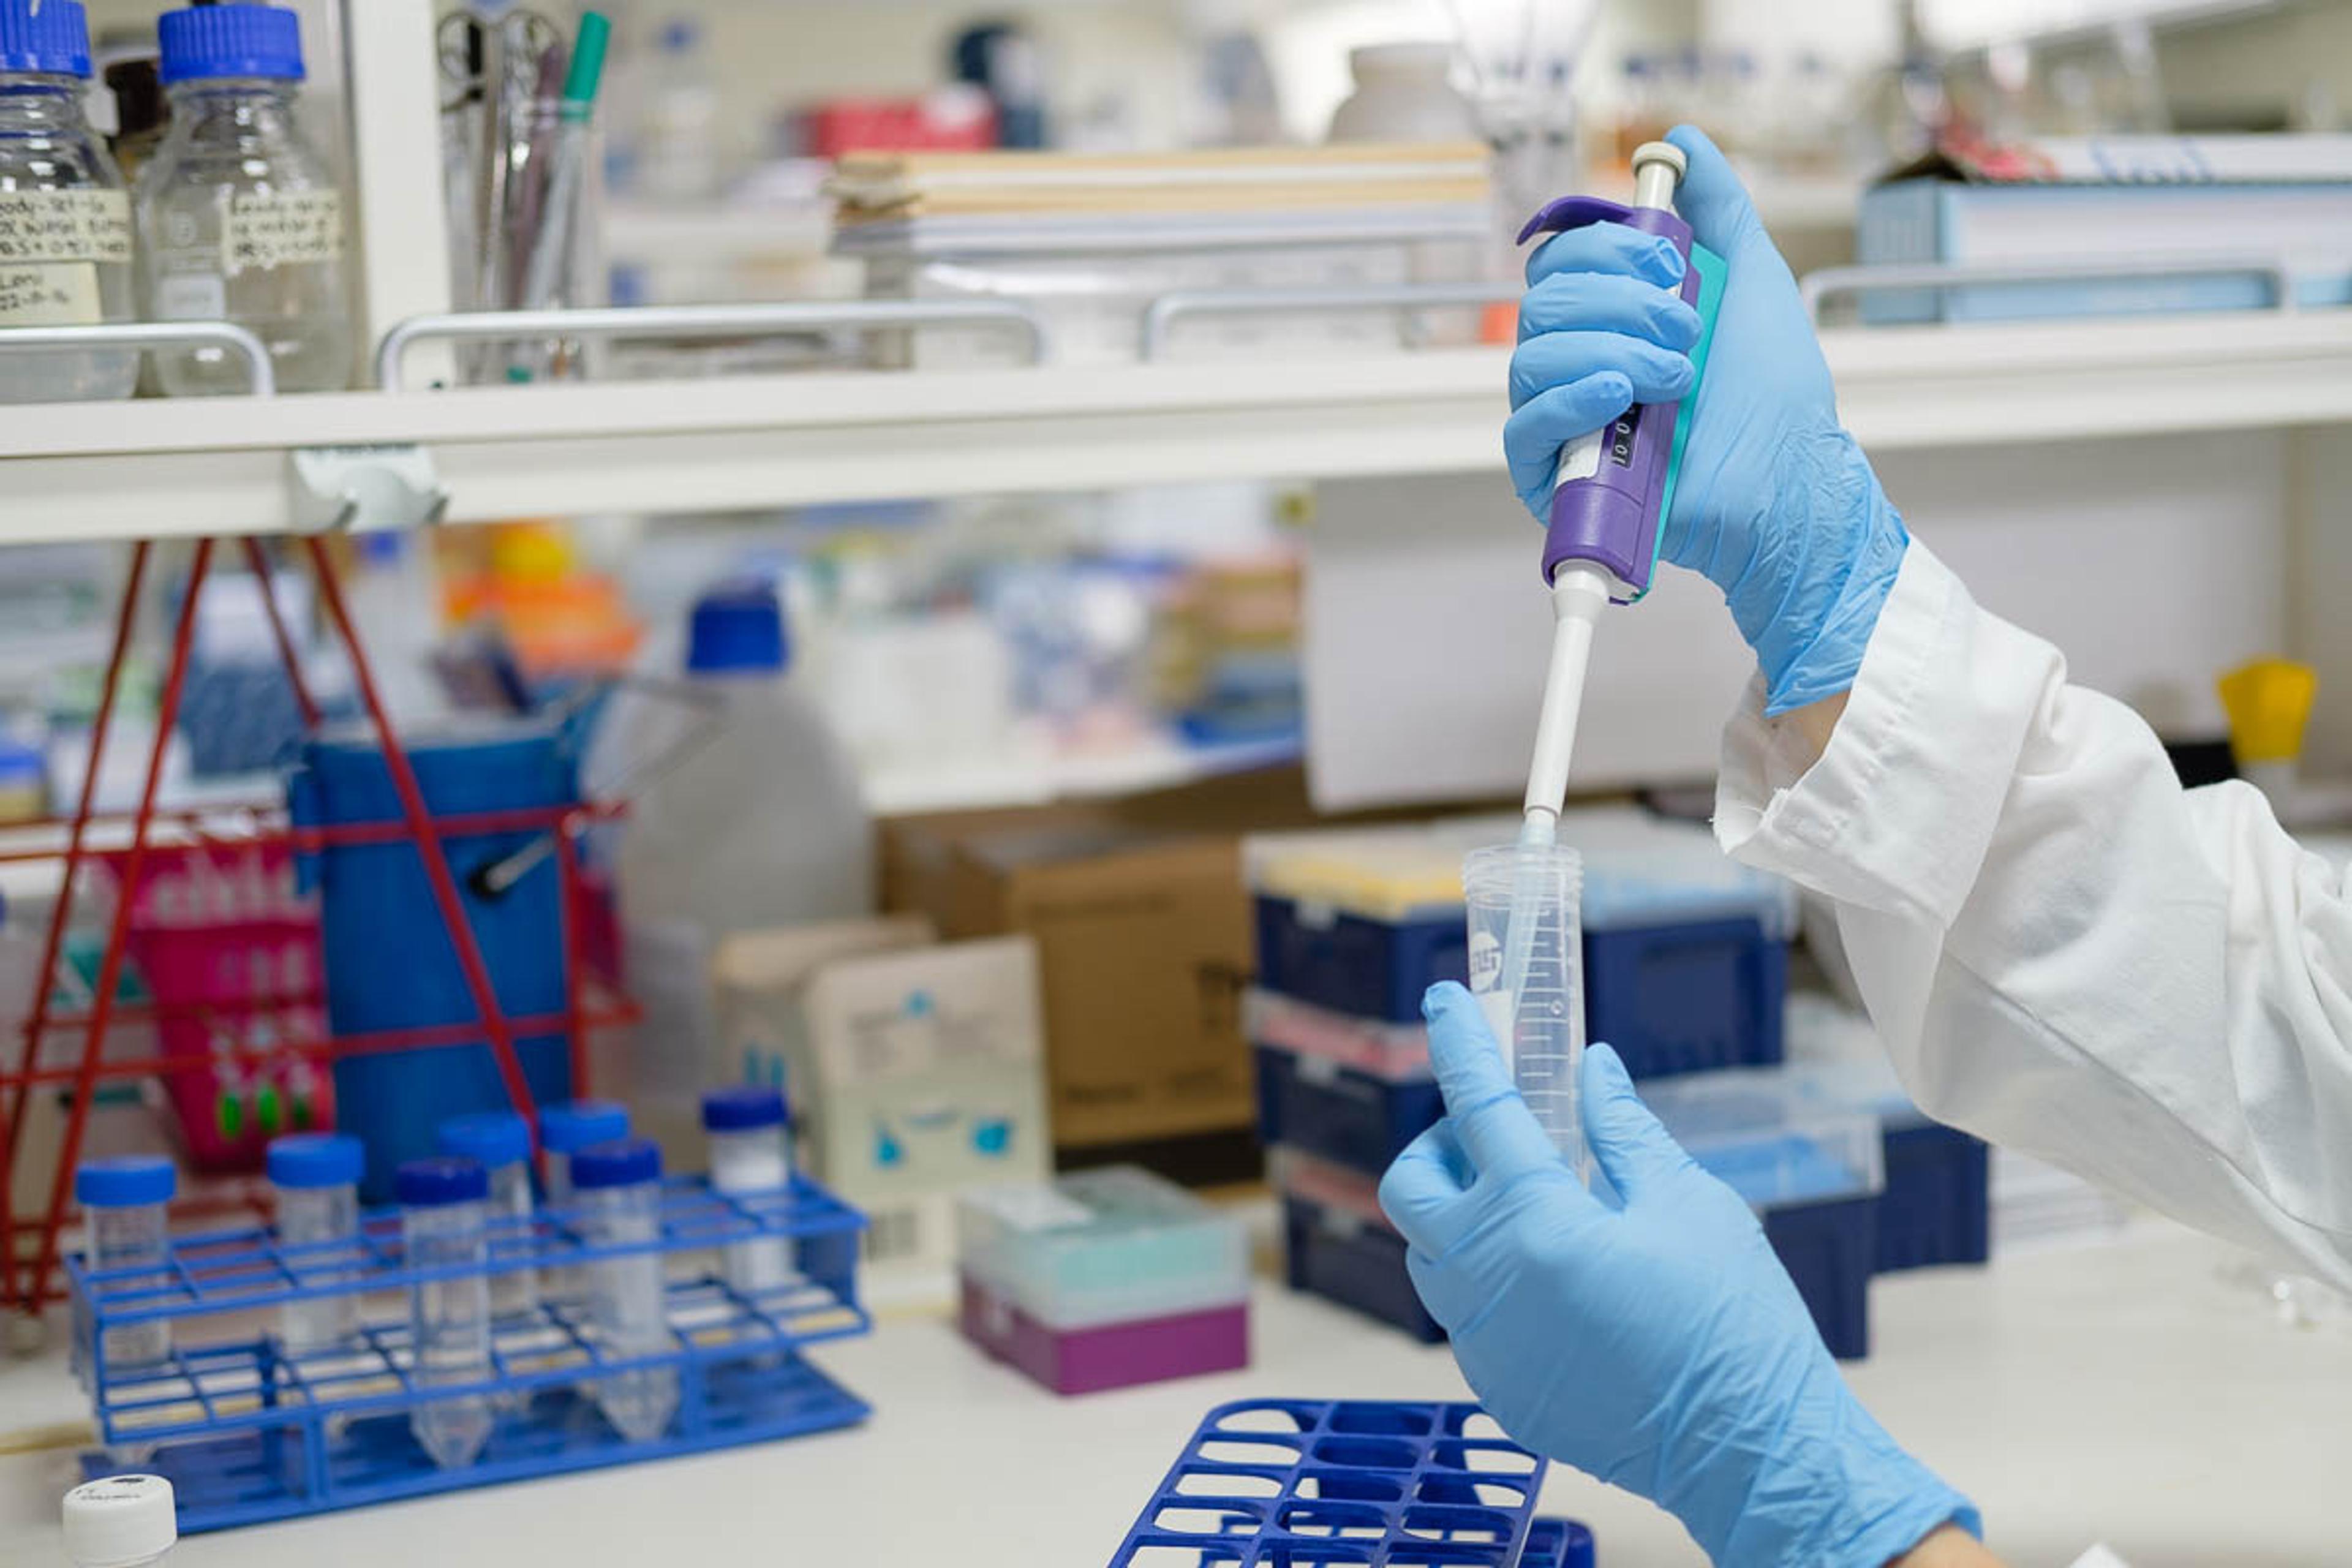 Hands with blue gloves on using a syringe to fill a test tube on a laboratory bench.